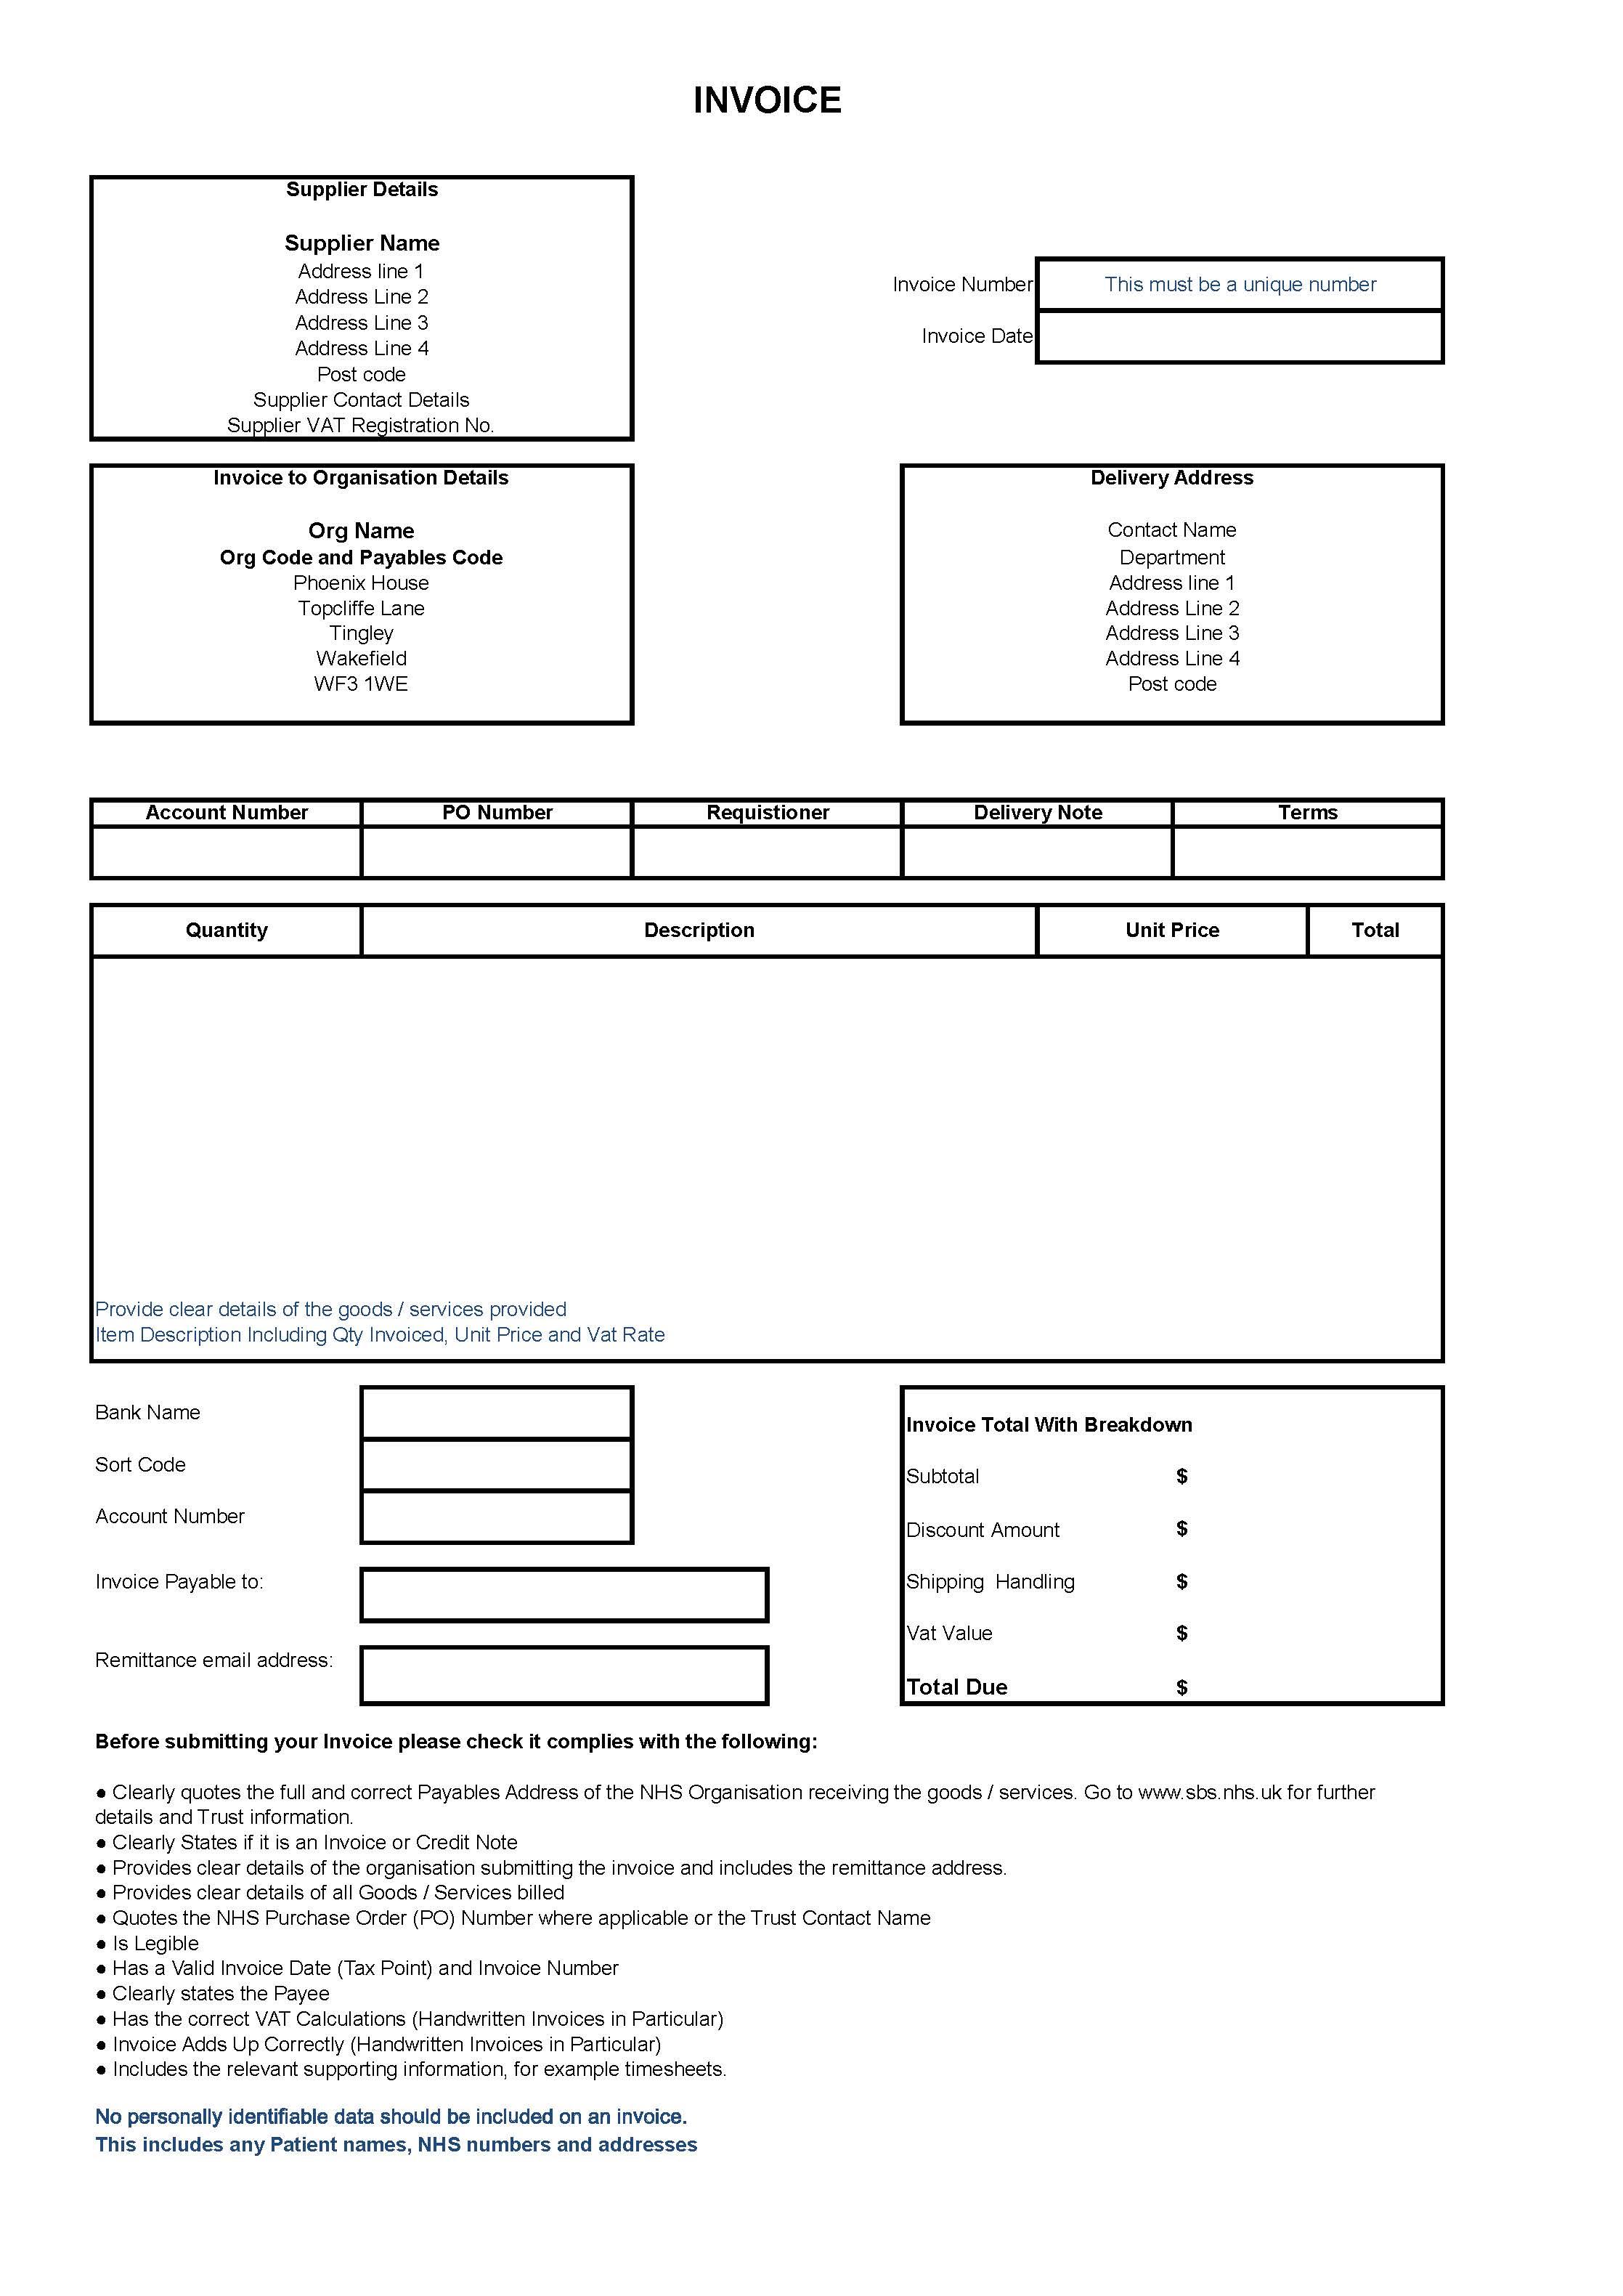 Invoice Order Delivery Template with Instructions 模板